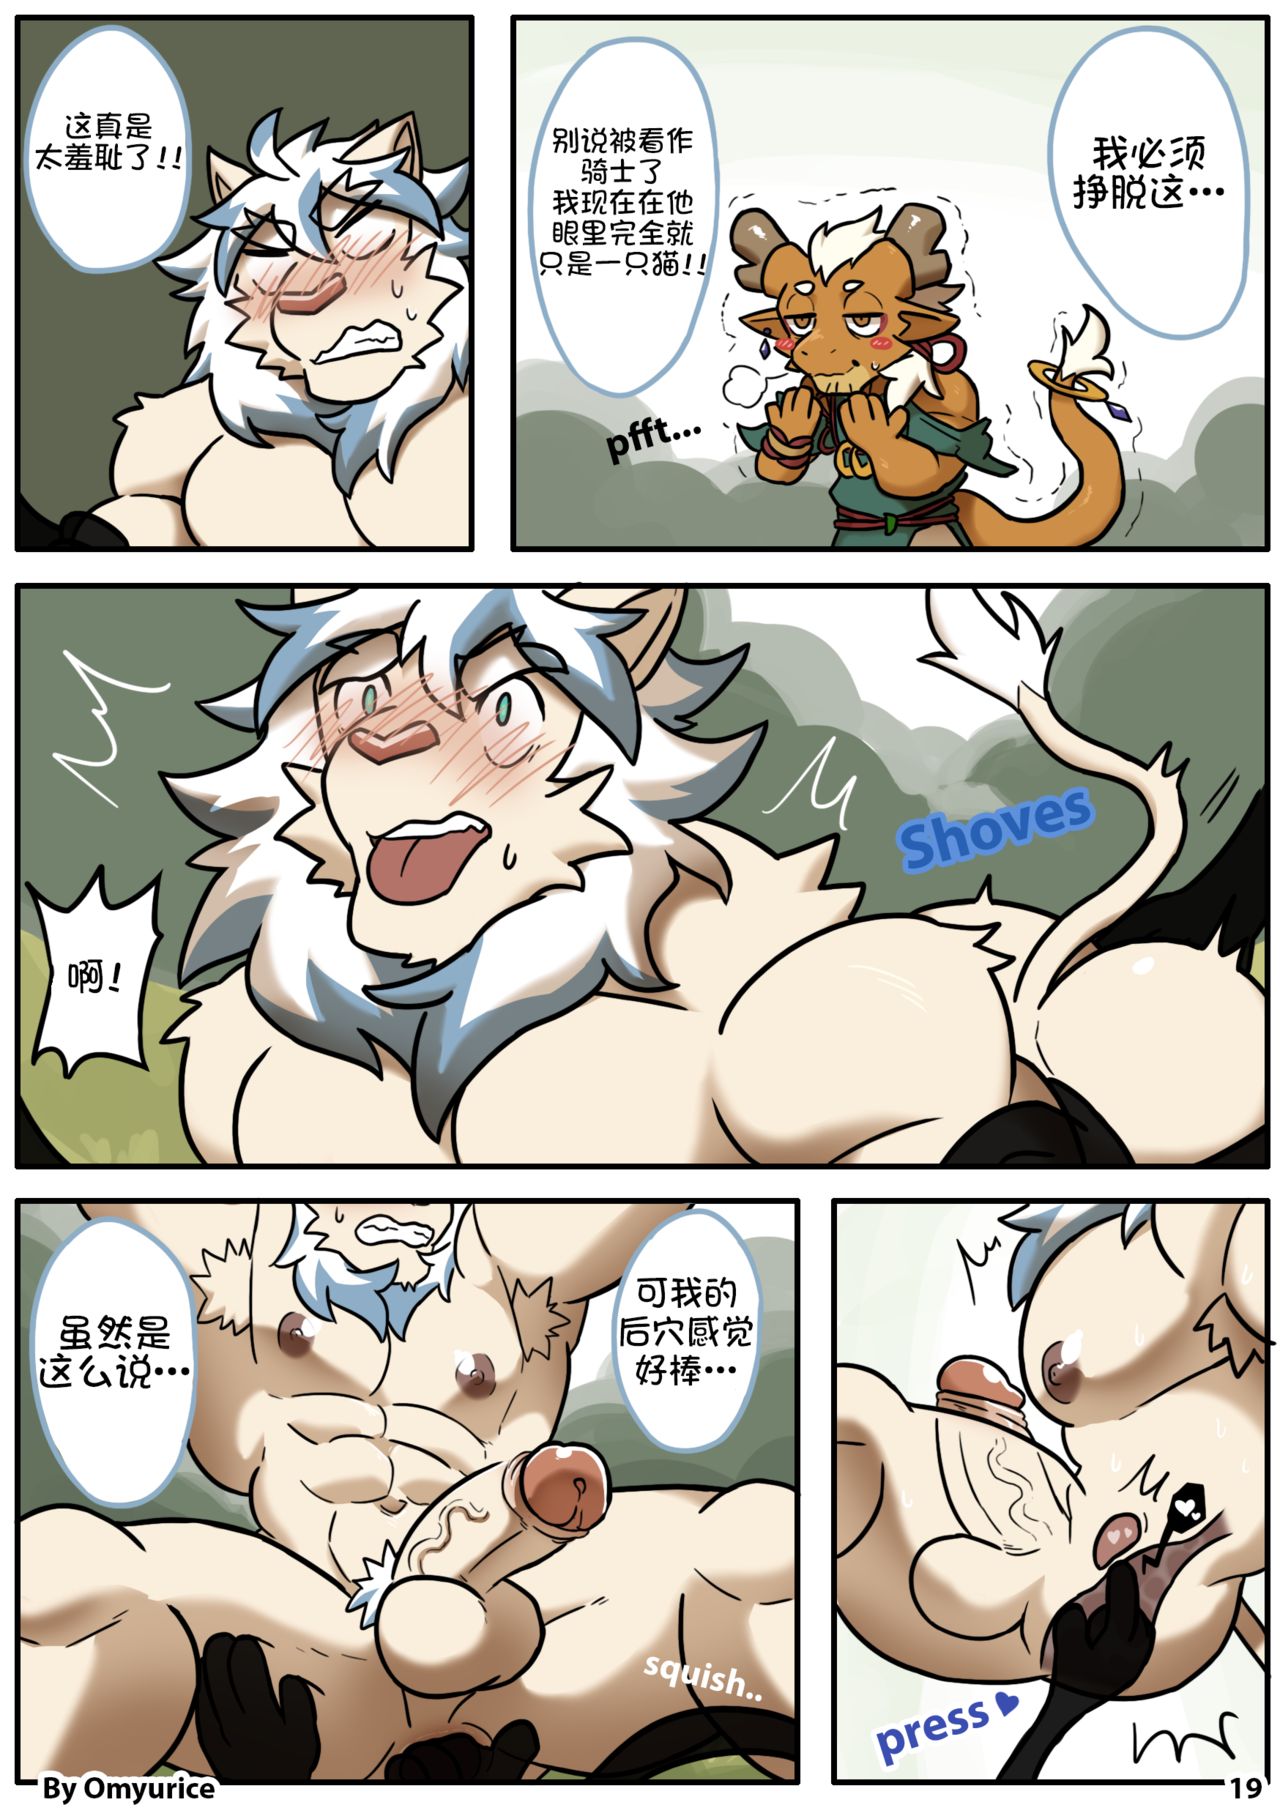 [Omyurice] Yooyu's Magical Adult Store Ch2 [Chinese] [落道汉化] 